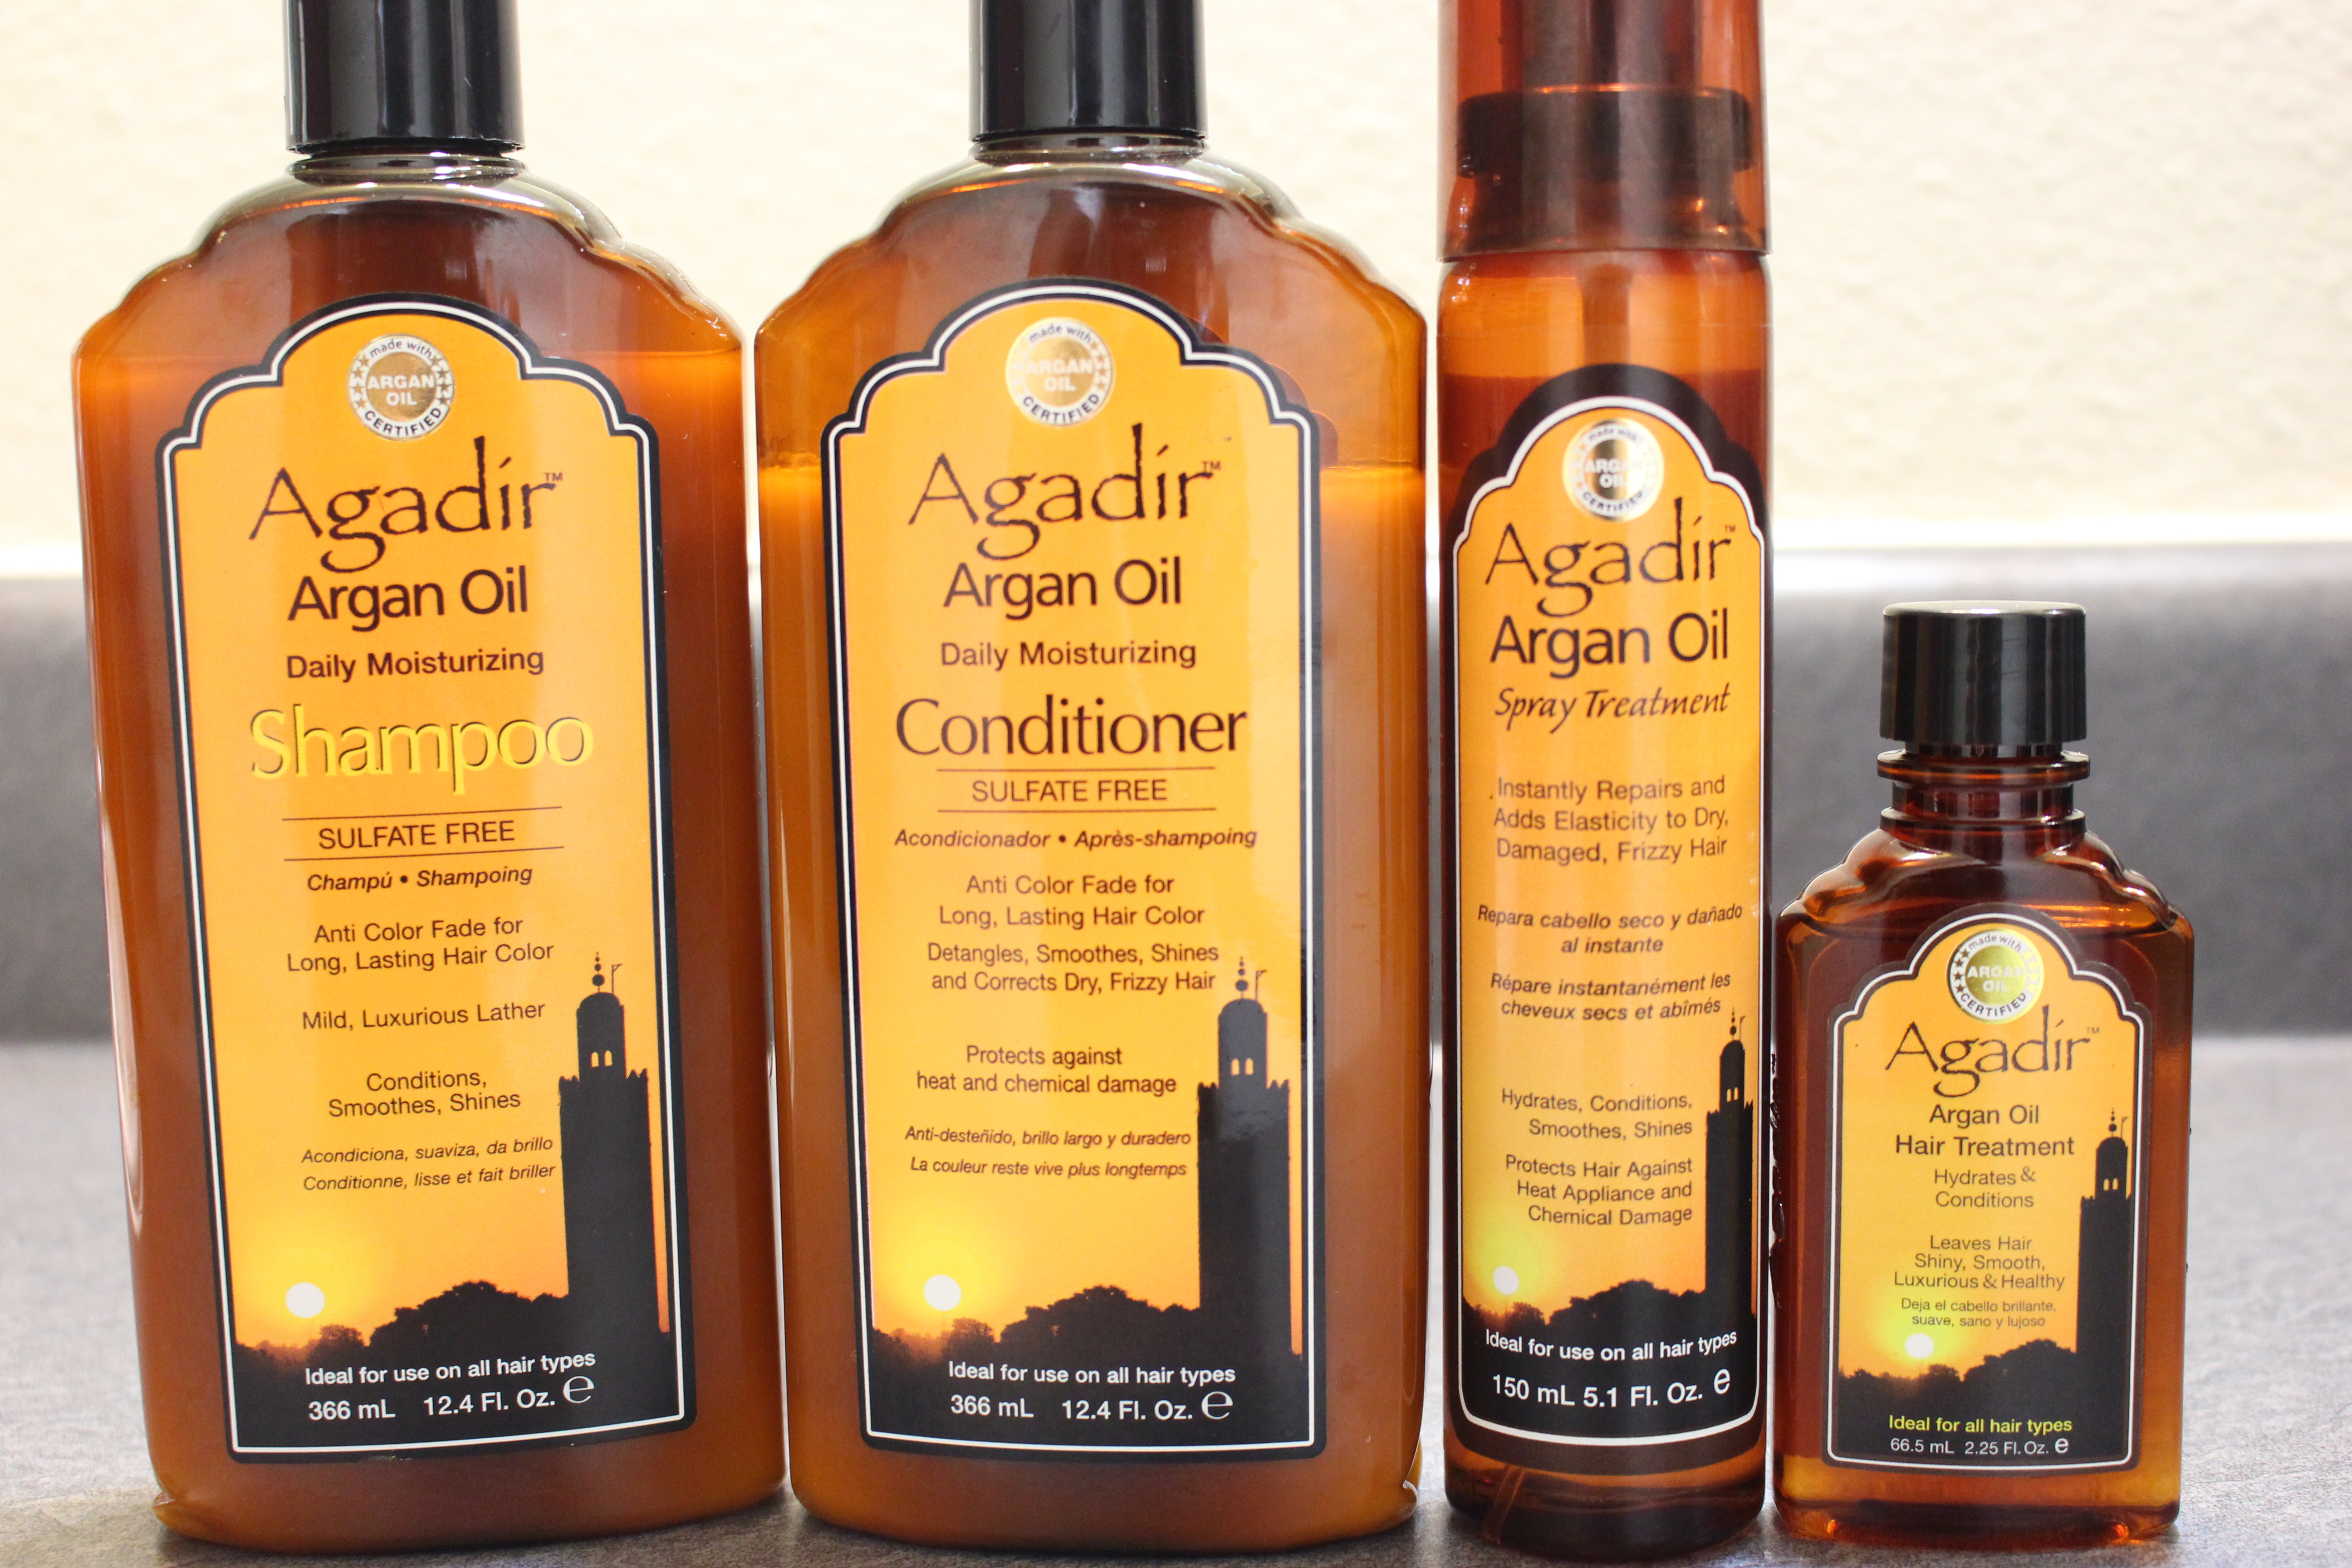 Use Agadir Argan Oil Products To Moisturize Condition And Style Hair